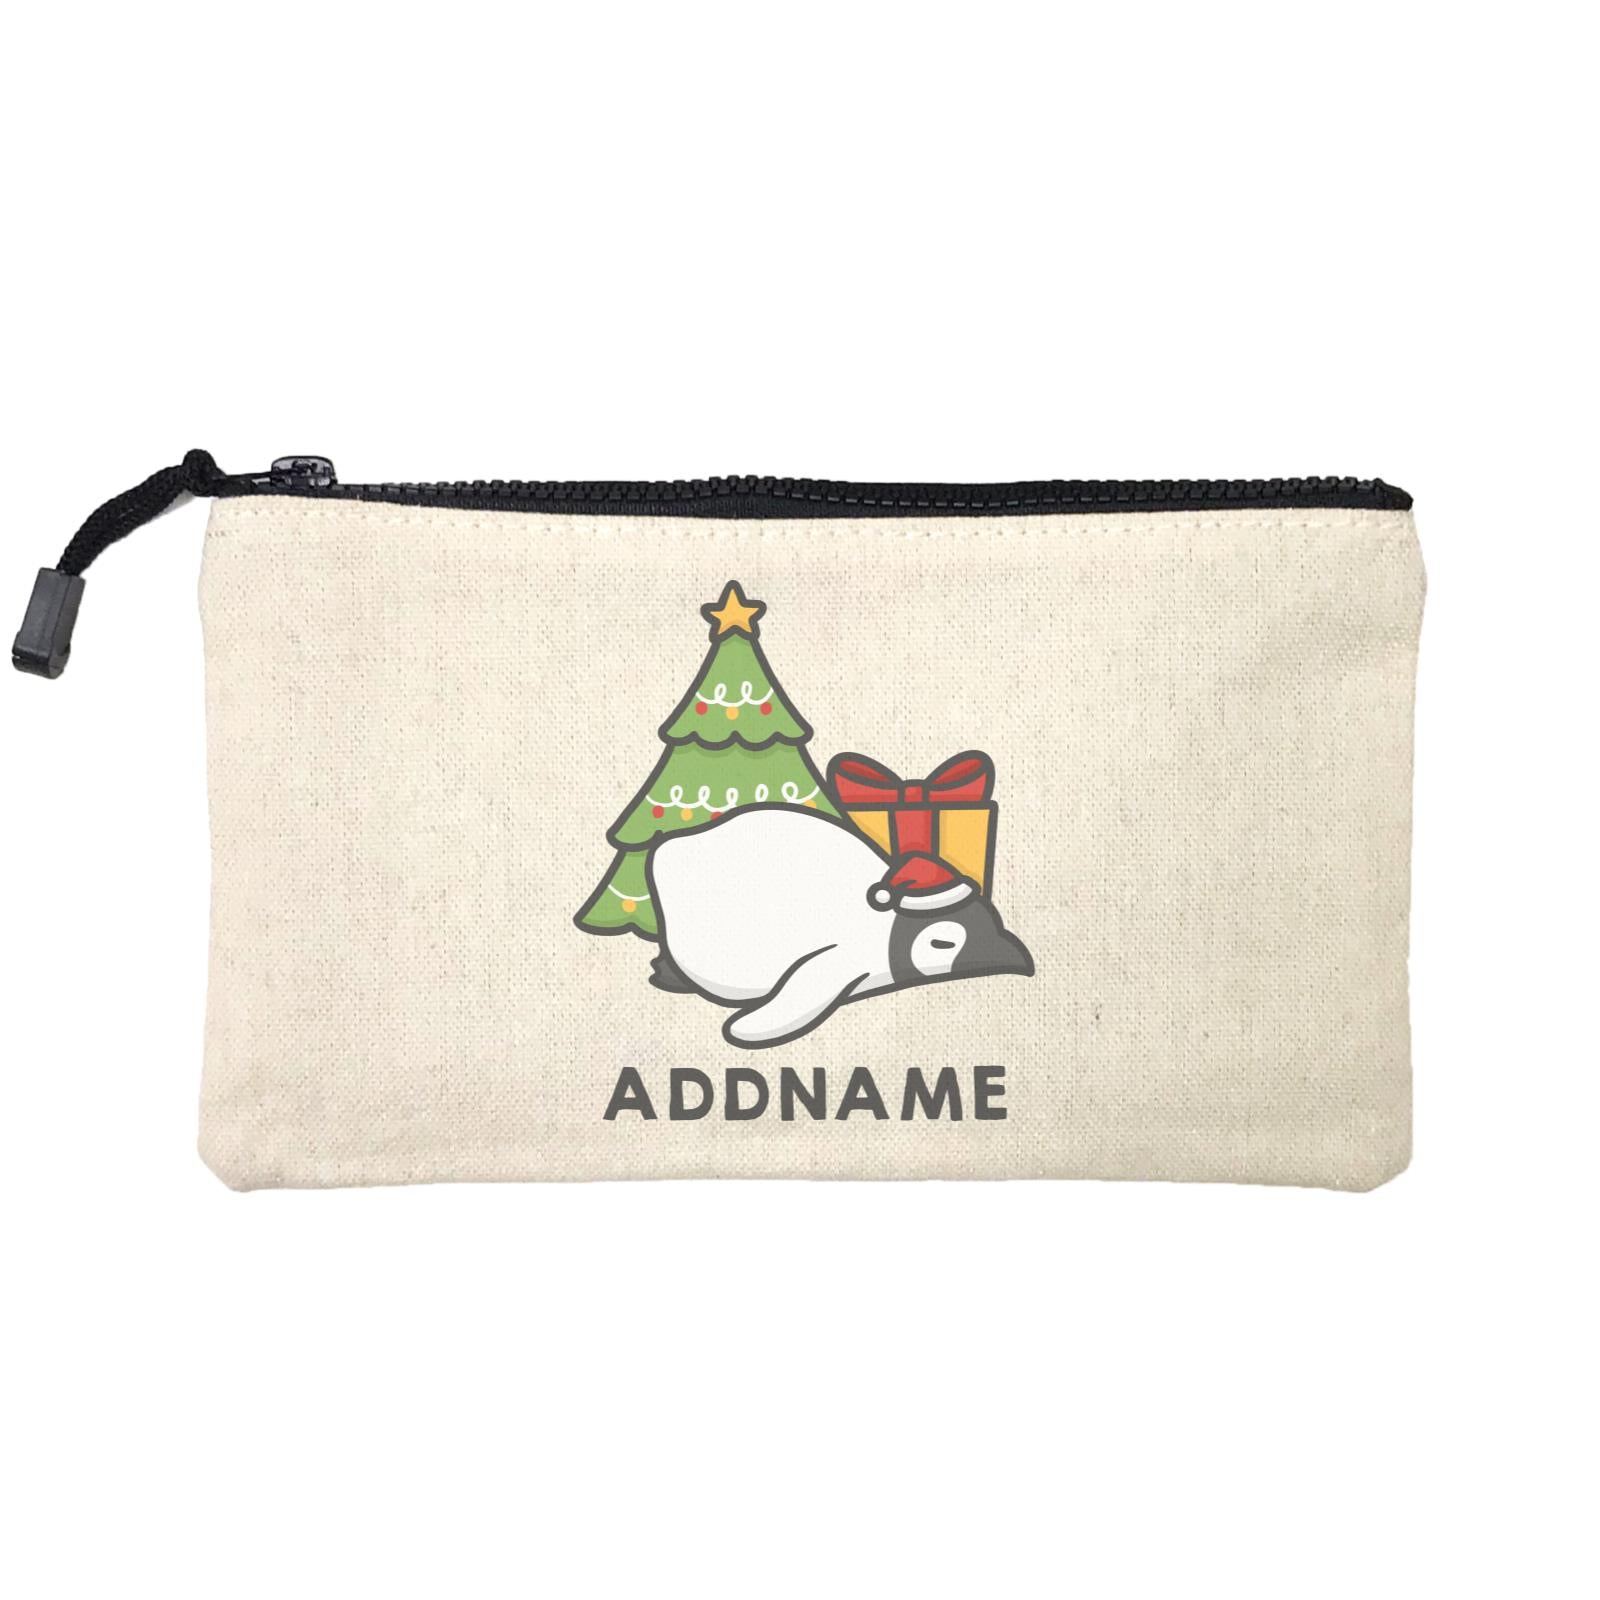 Xmas Cute Sleeping Pengiun Addname Mini Accessories Stationery Pouch